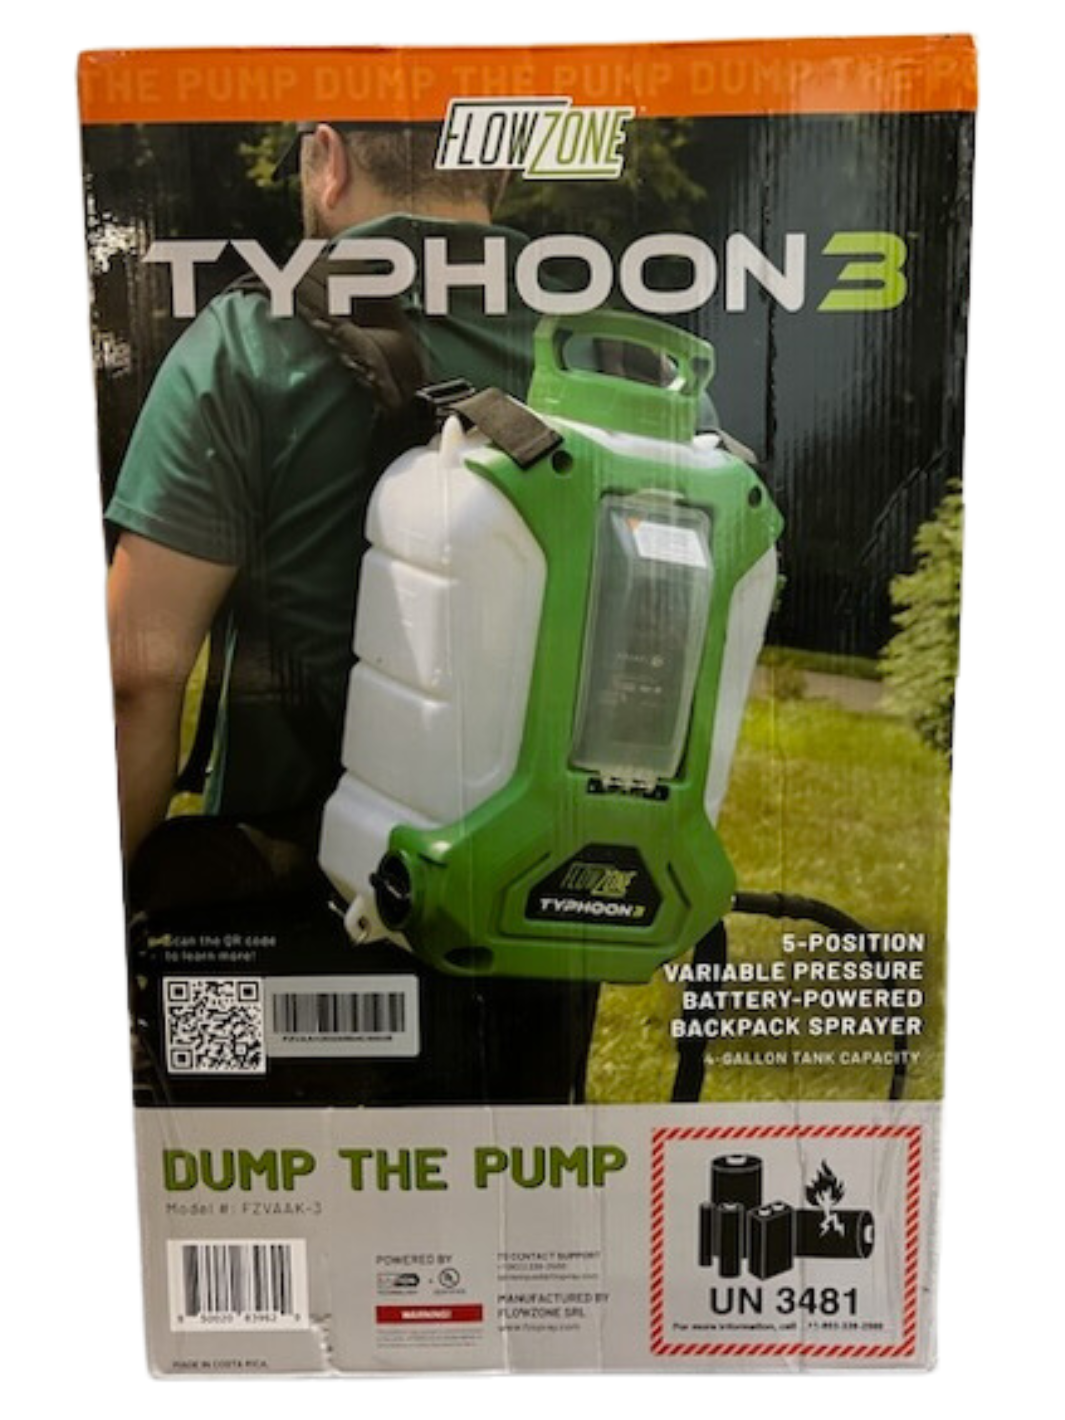 Back of FlowZone Typhoon Series 3 Battery Operated Backpack Sprayer Box